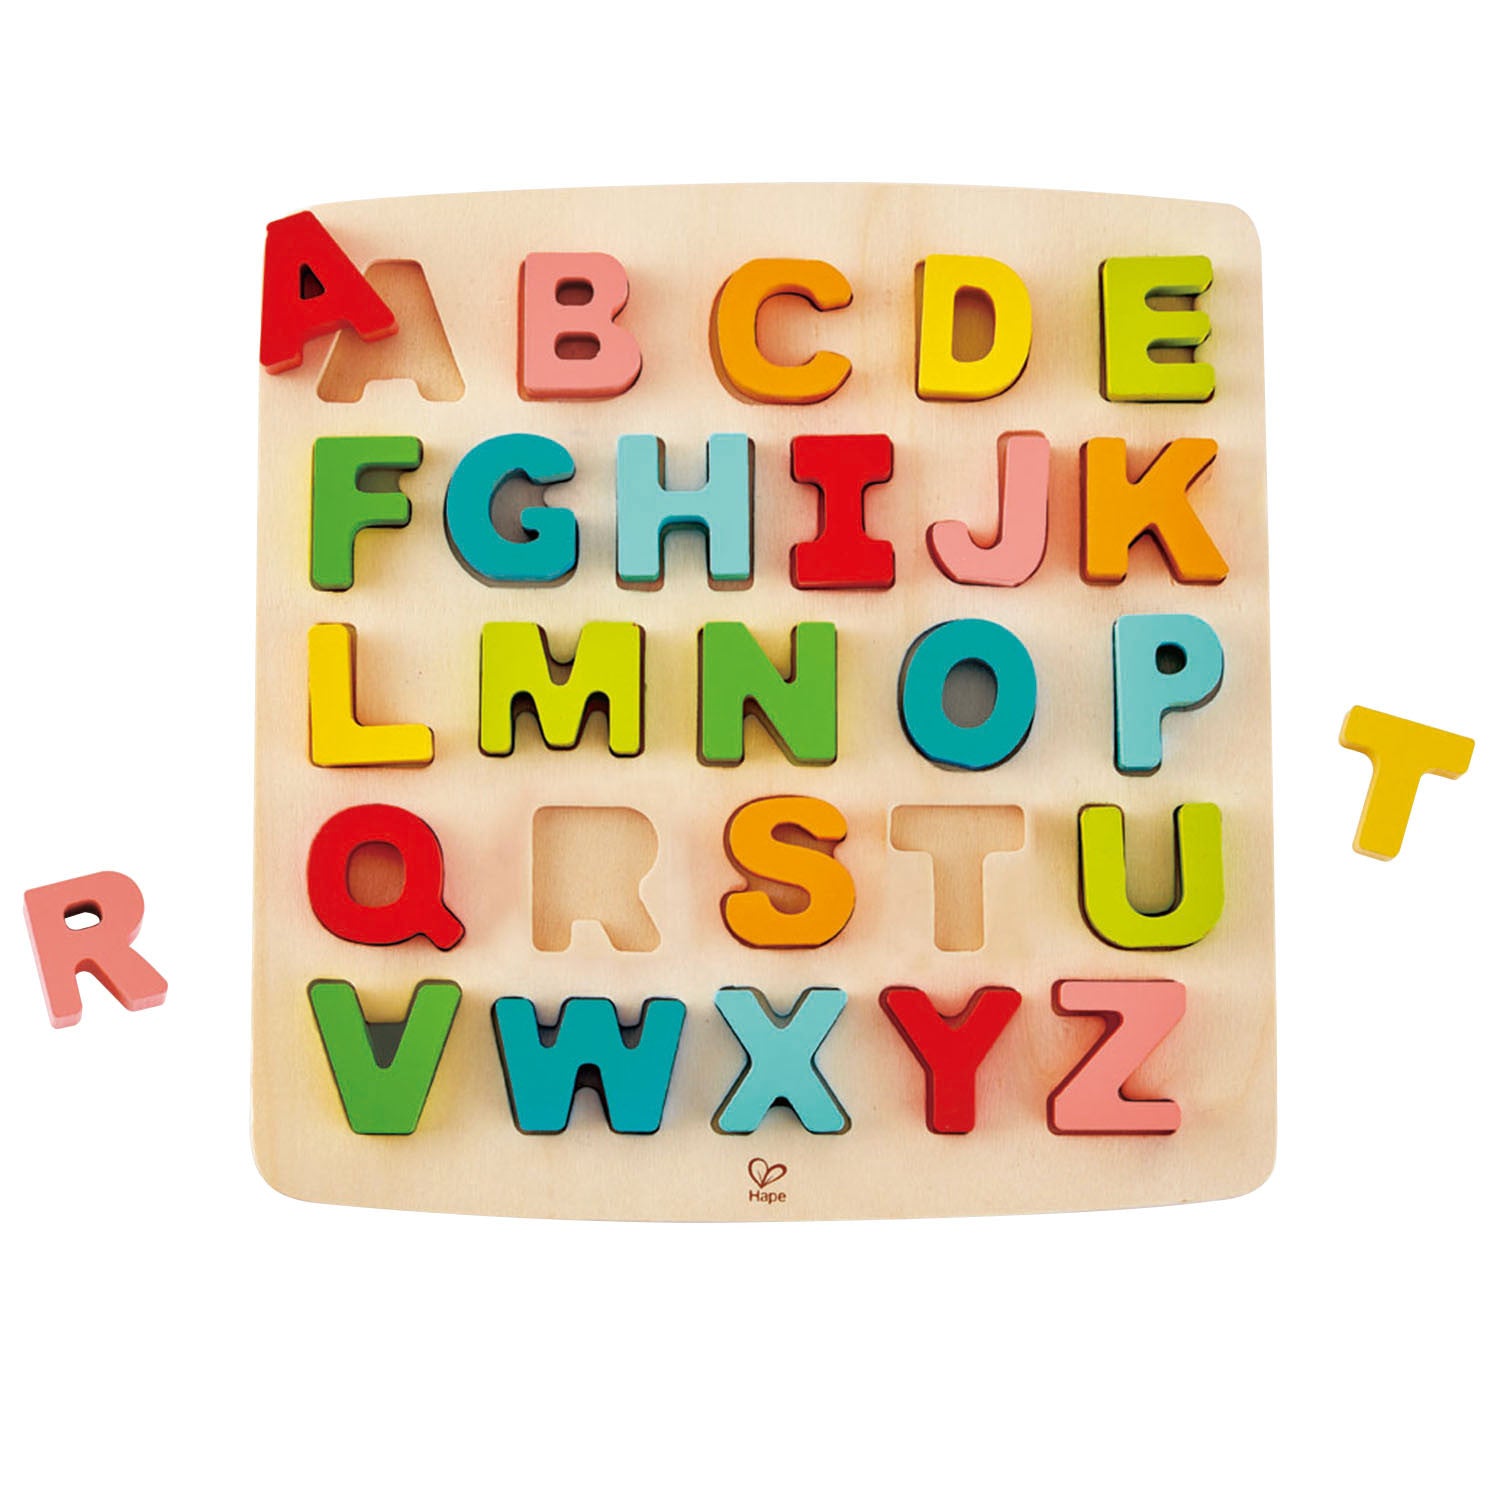 Hape Chunky Alphabet Puzzle Uppercase E1551 Suitable For 3 Years and Above Children